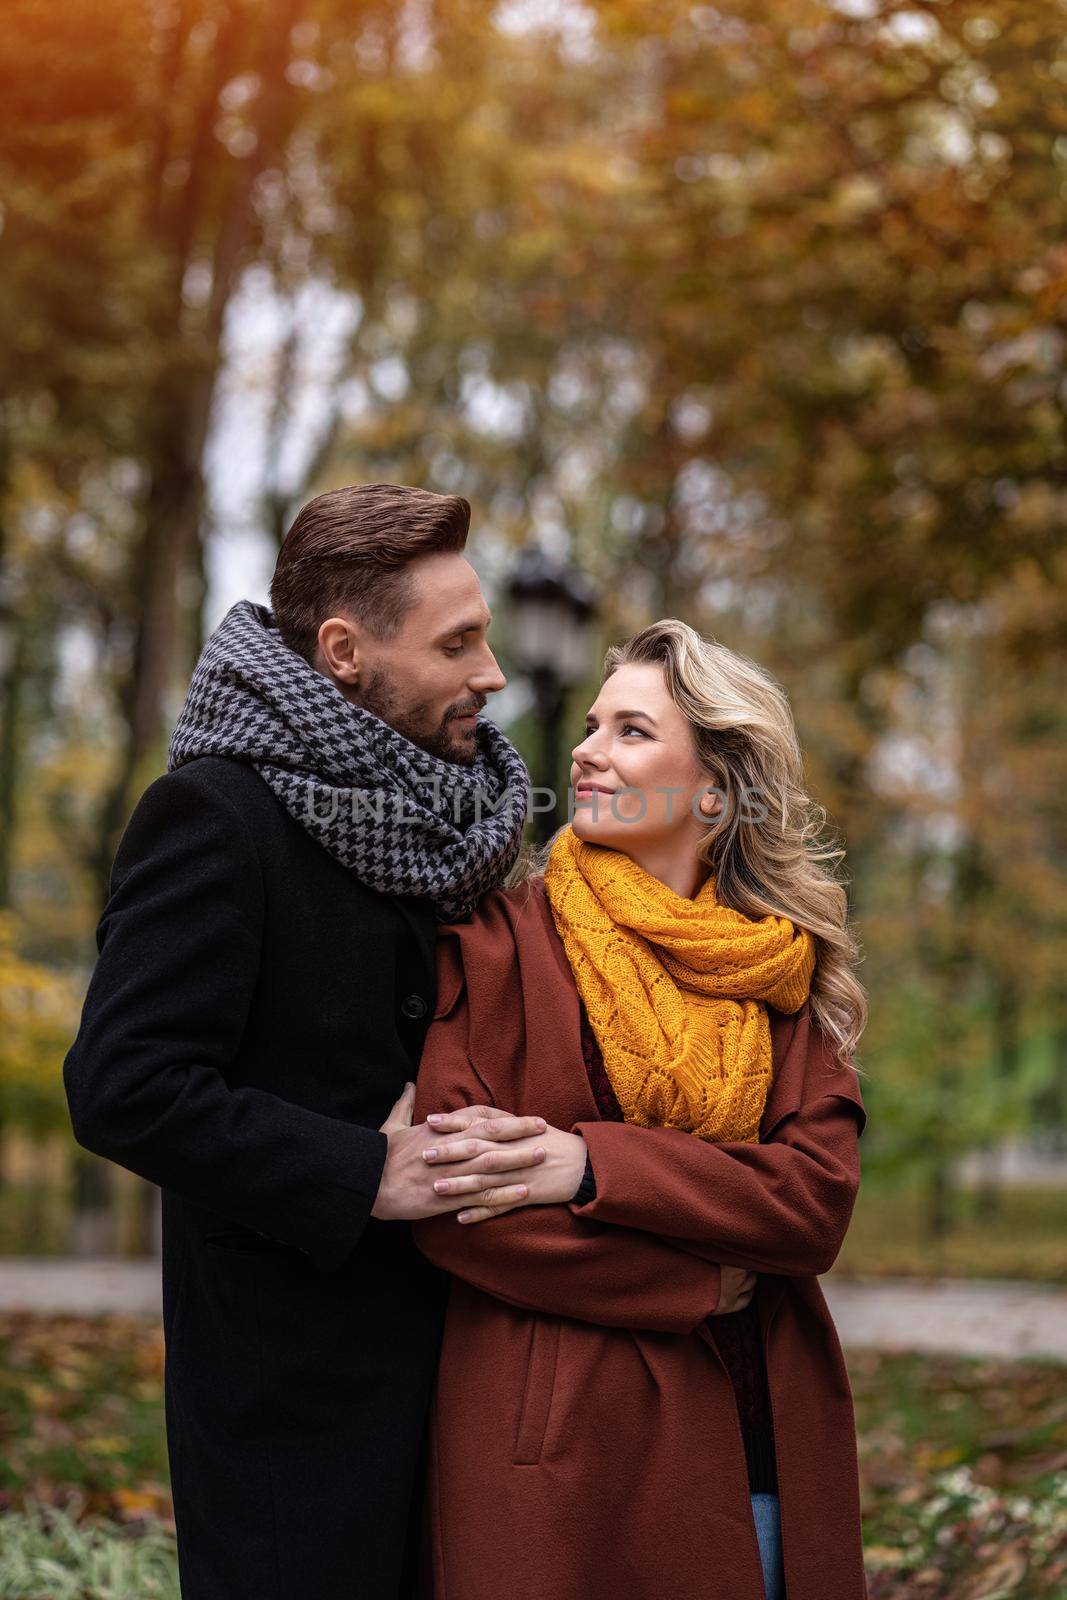 Handsome man and a woman hugged from behind smile looking at each other in the autumn park. Outdoor shot of a young couple in love having great time. Autumn toned image by LipikStockMedia